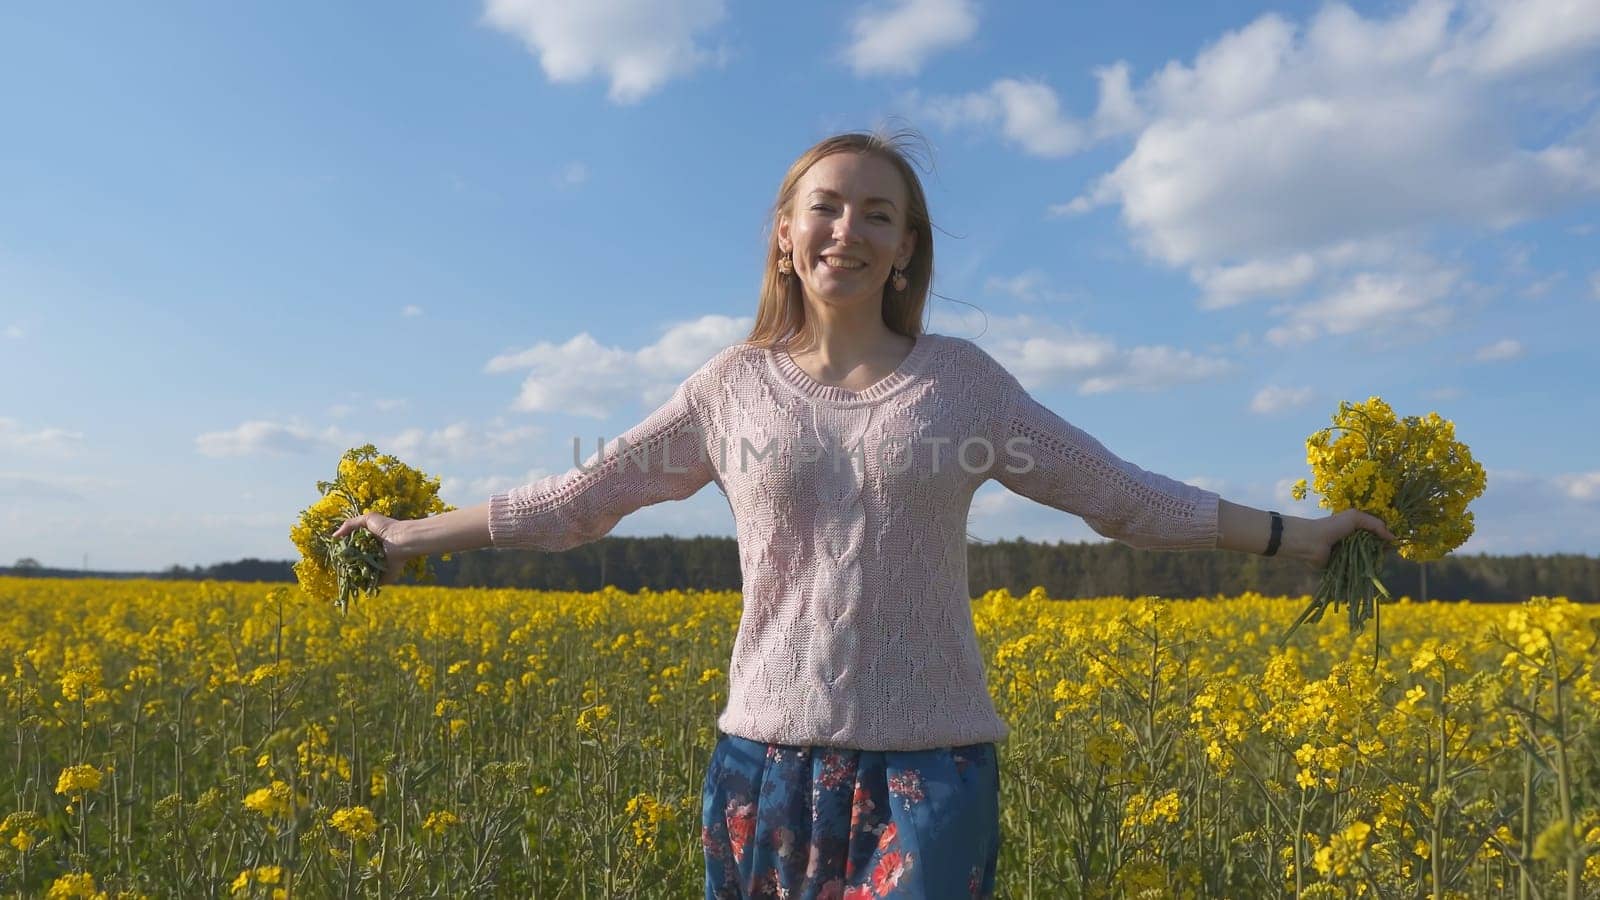 Happy girl with a bouquet of rapeseed flowers in a yellow rapeseed field